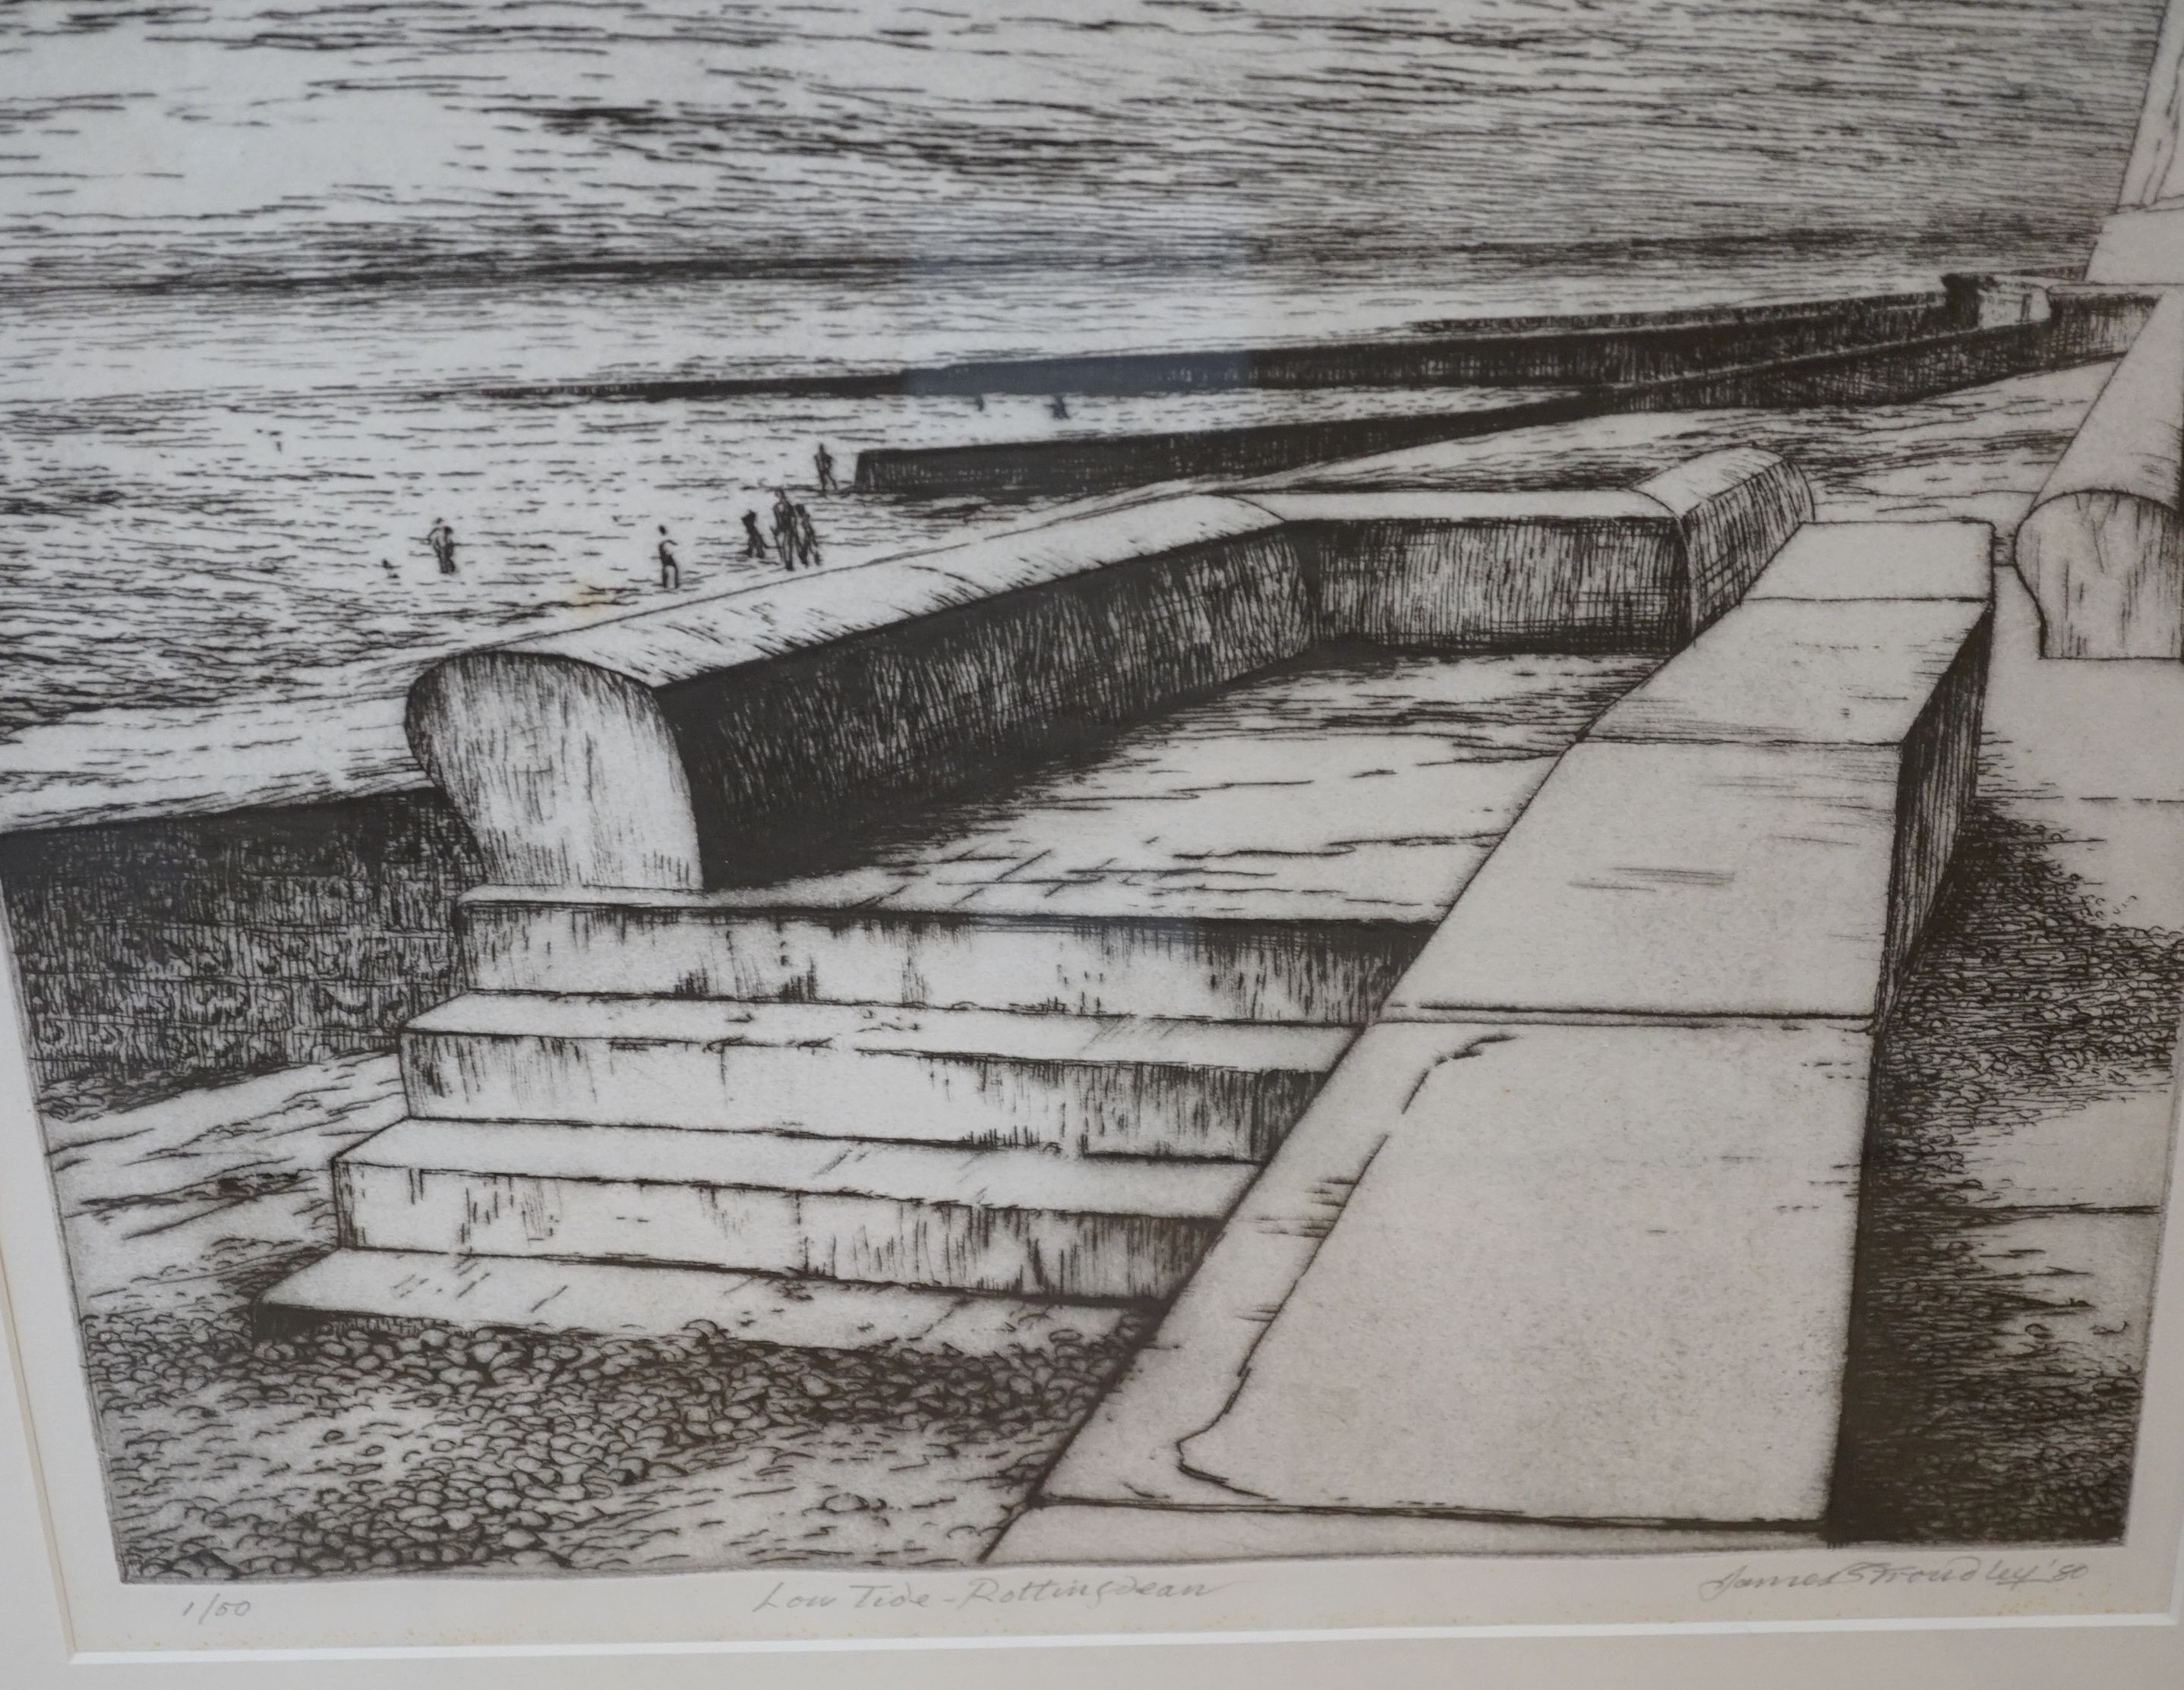 James Stroudley, three etchings, fresh weather in the channel, sort Dean, seawall Rottingdean, low tide Rottingdean, signed, largest image 33.5 cm X 31 cm